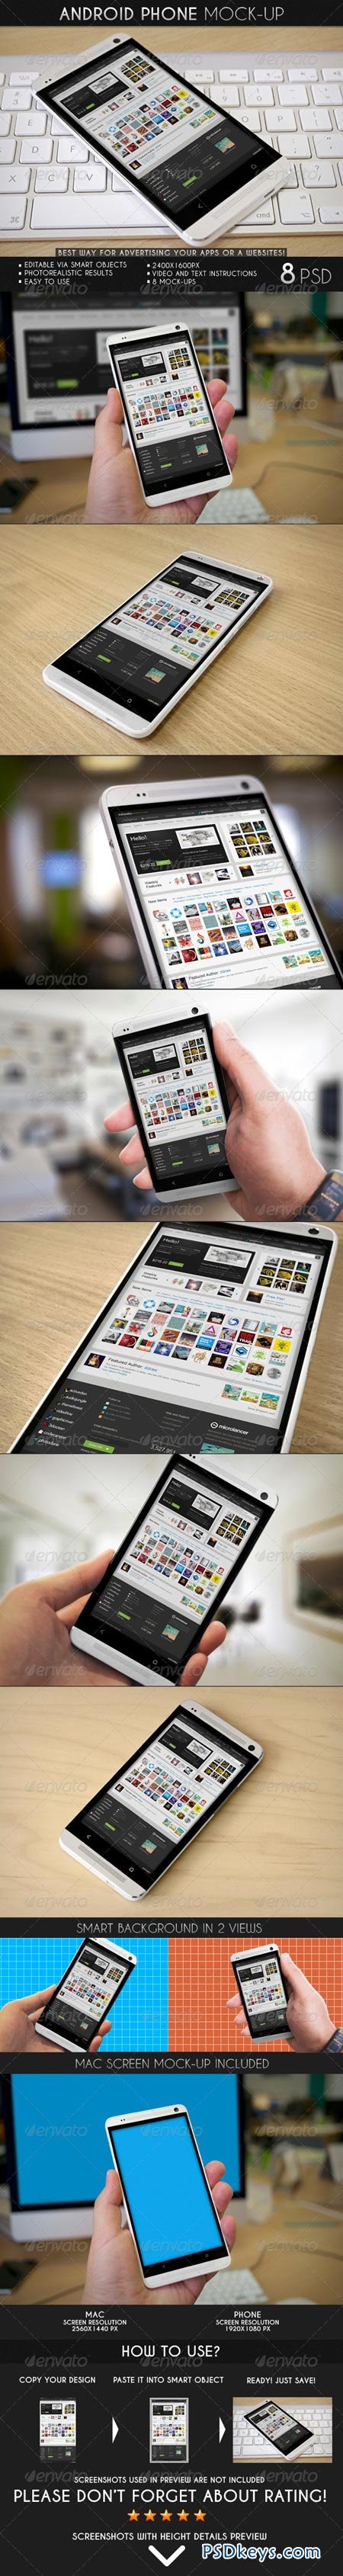 Android Phone Mock-Up 7209703